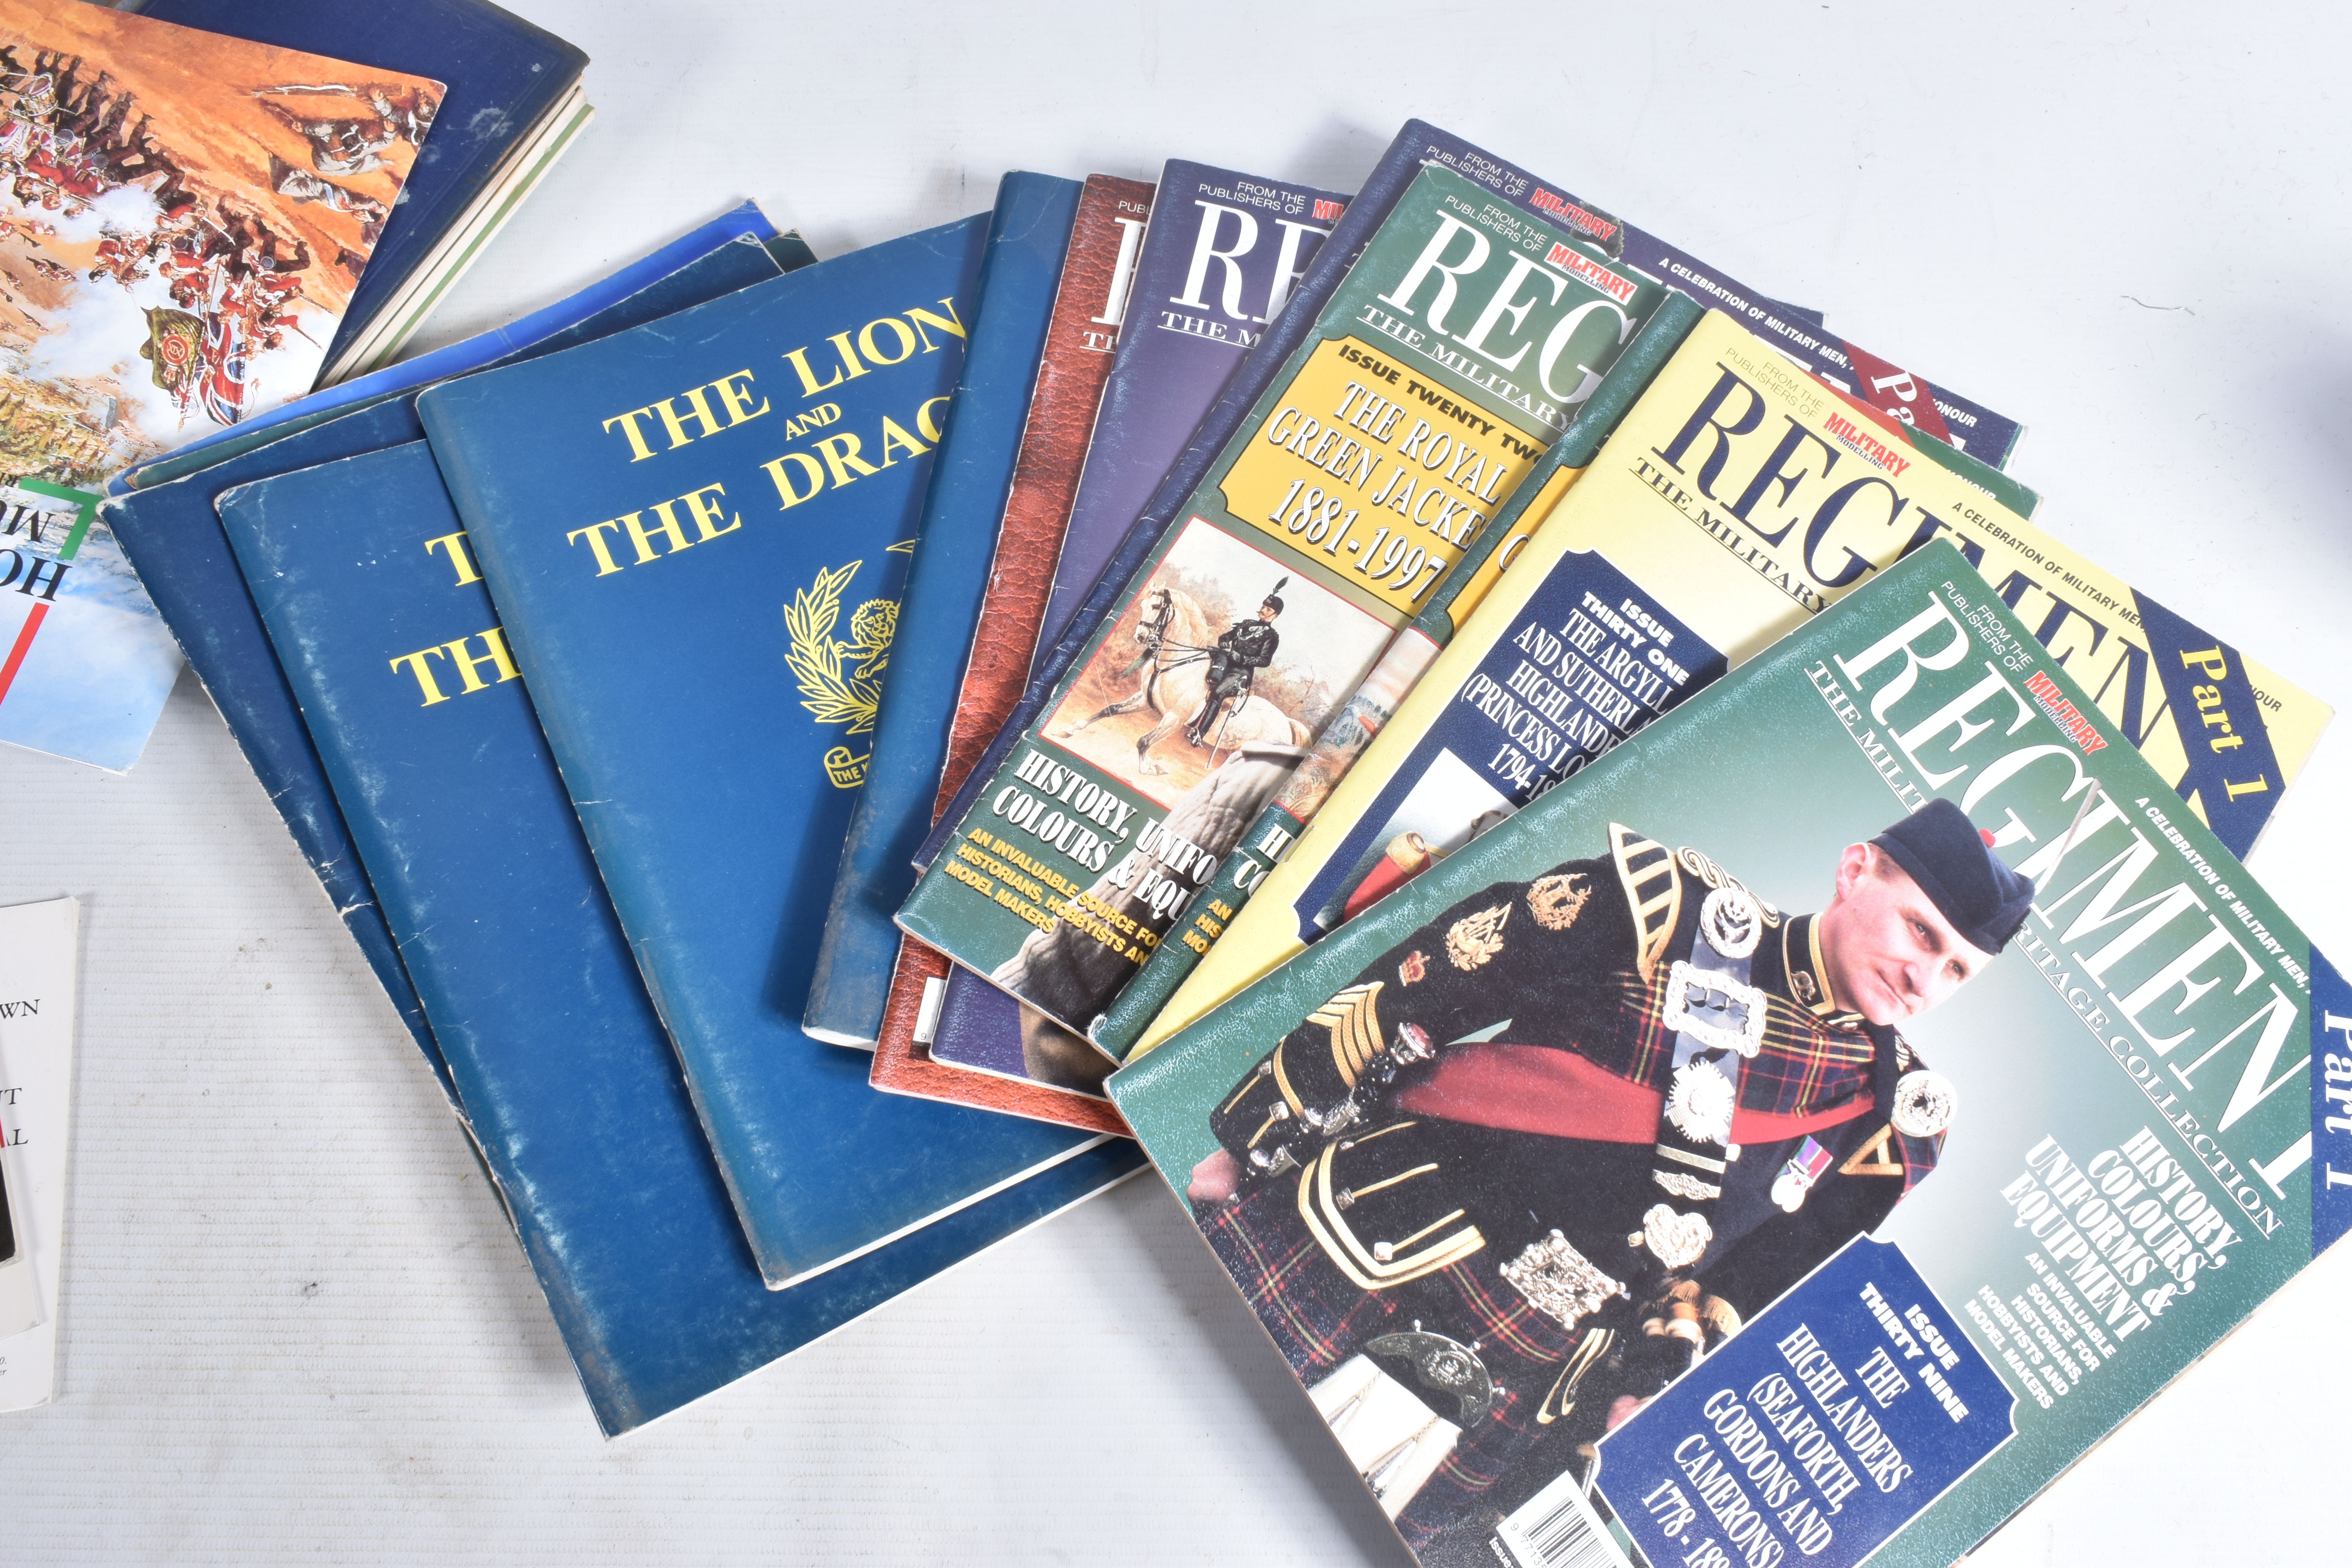 A SELECTION OF SOFT BACK BOOKS AND MAGAZINES, many editions from the 1960's onwards about the - Image 4 of 8